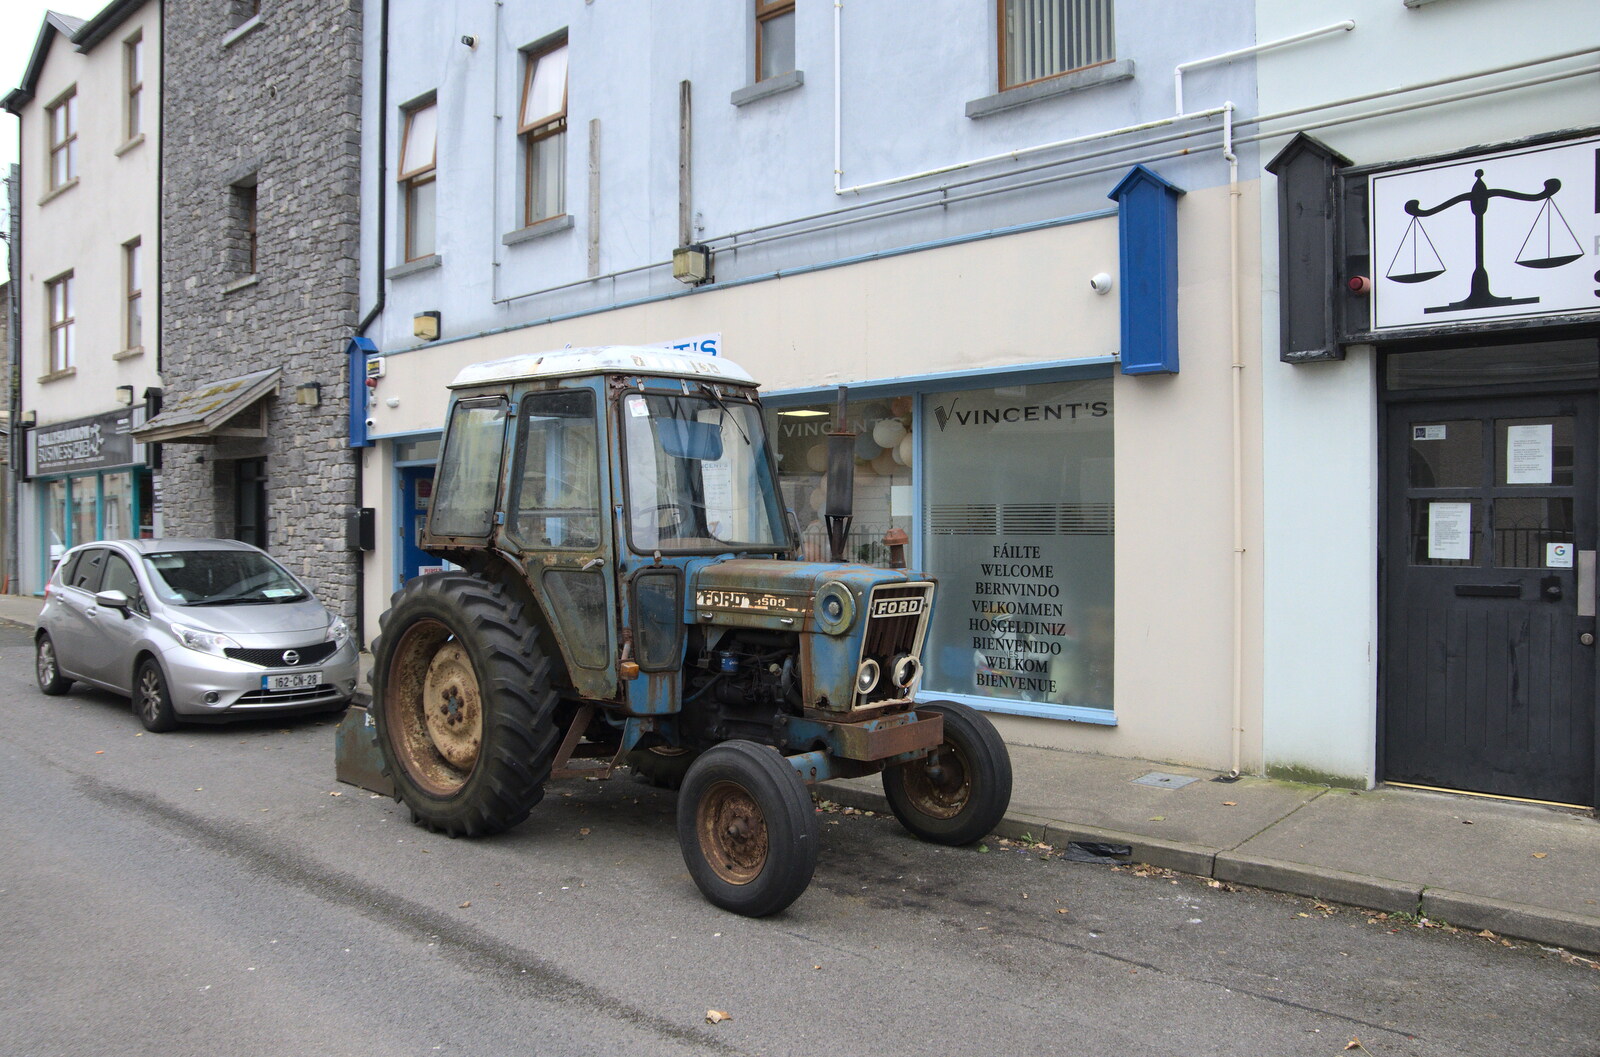 There's an ancient tractor parked on the street from Manorhamilton and Bundoran, Leitrim and Donegal, Ireland - 16th April 2022